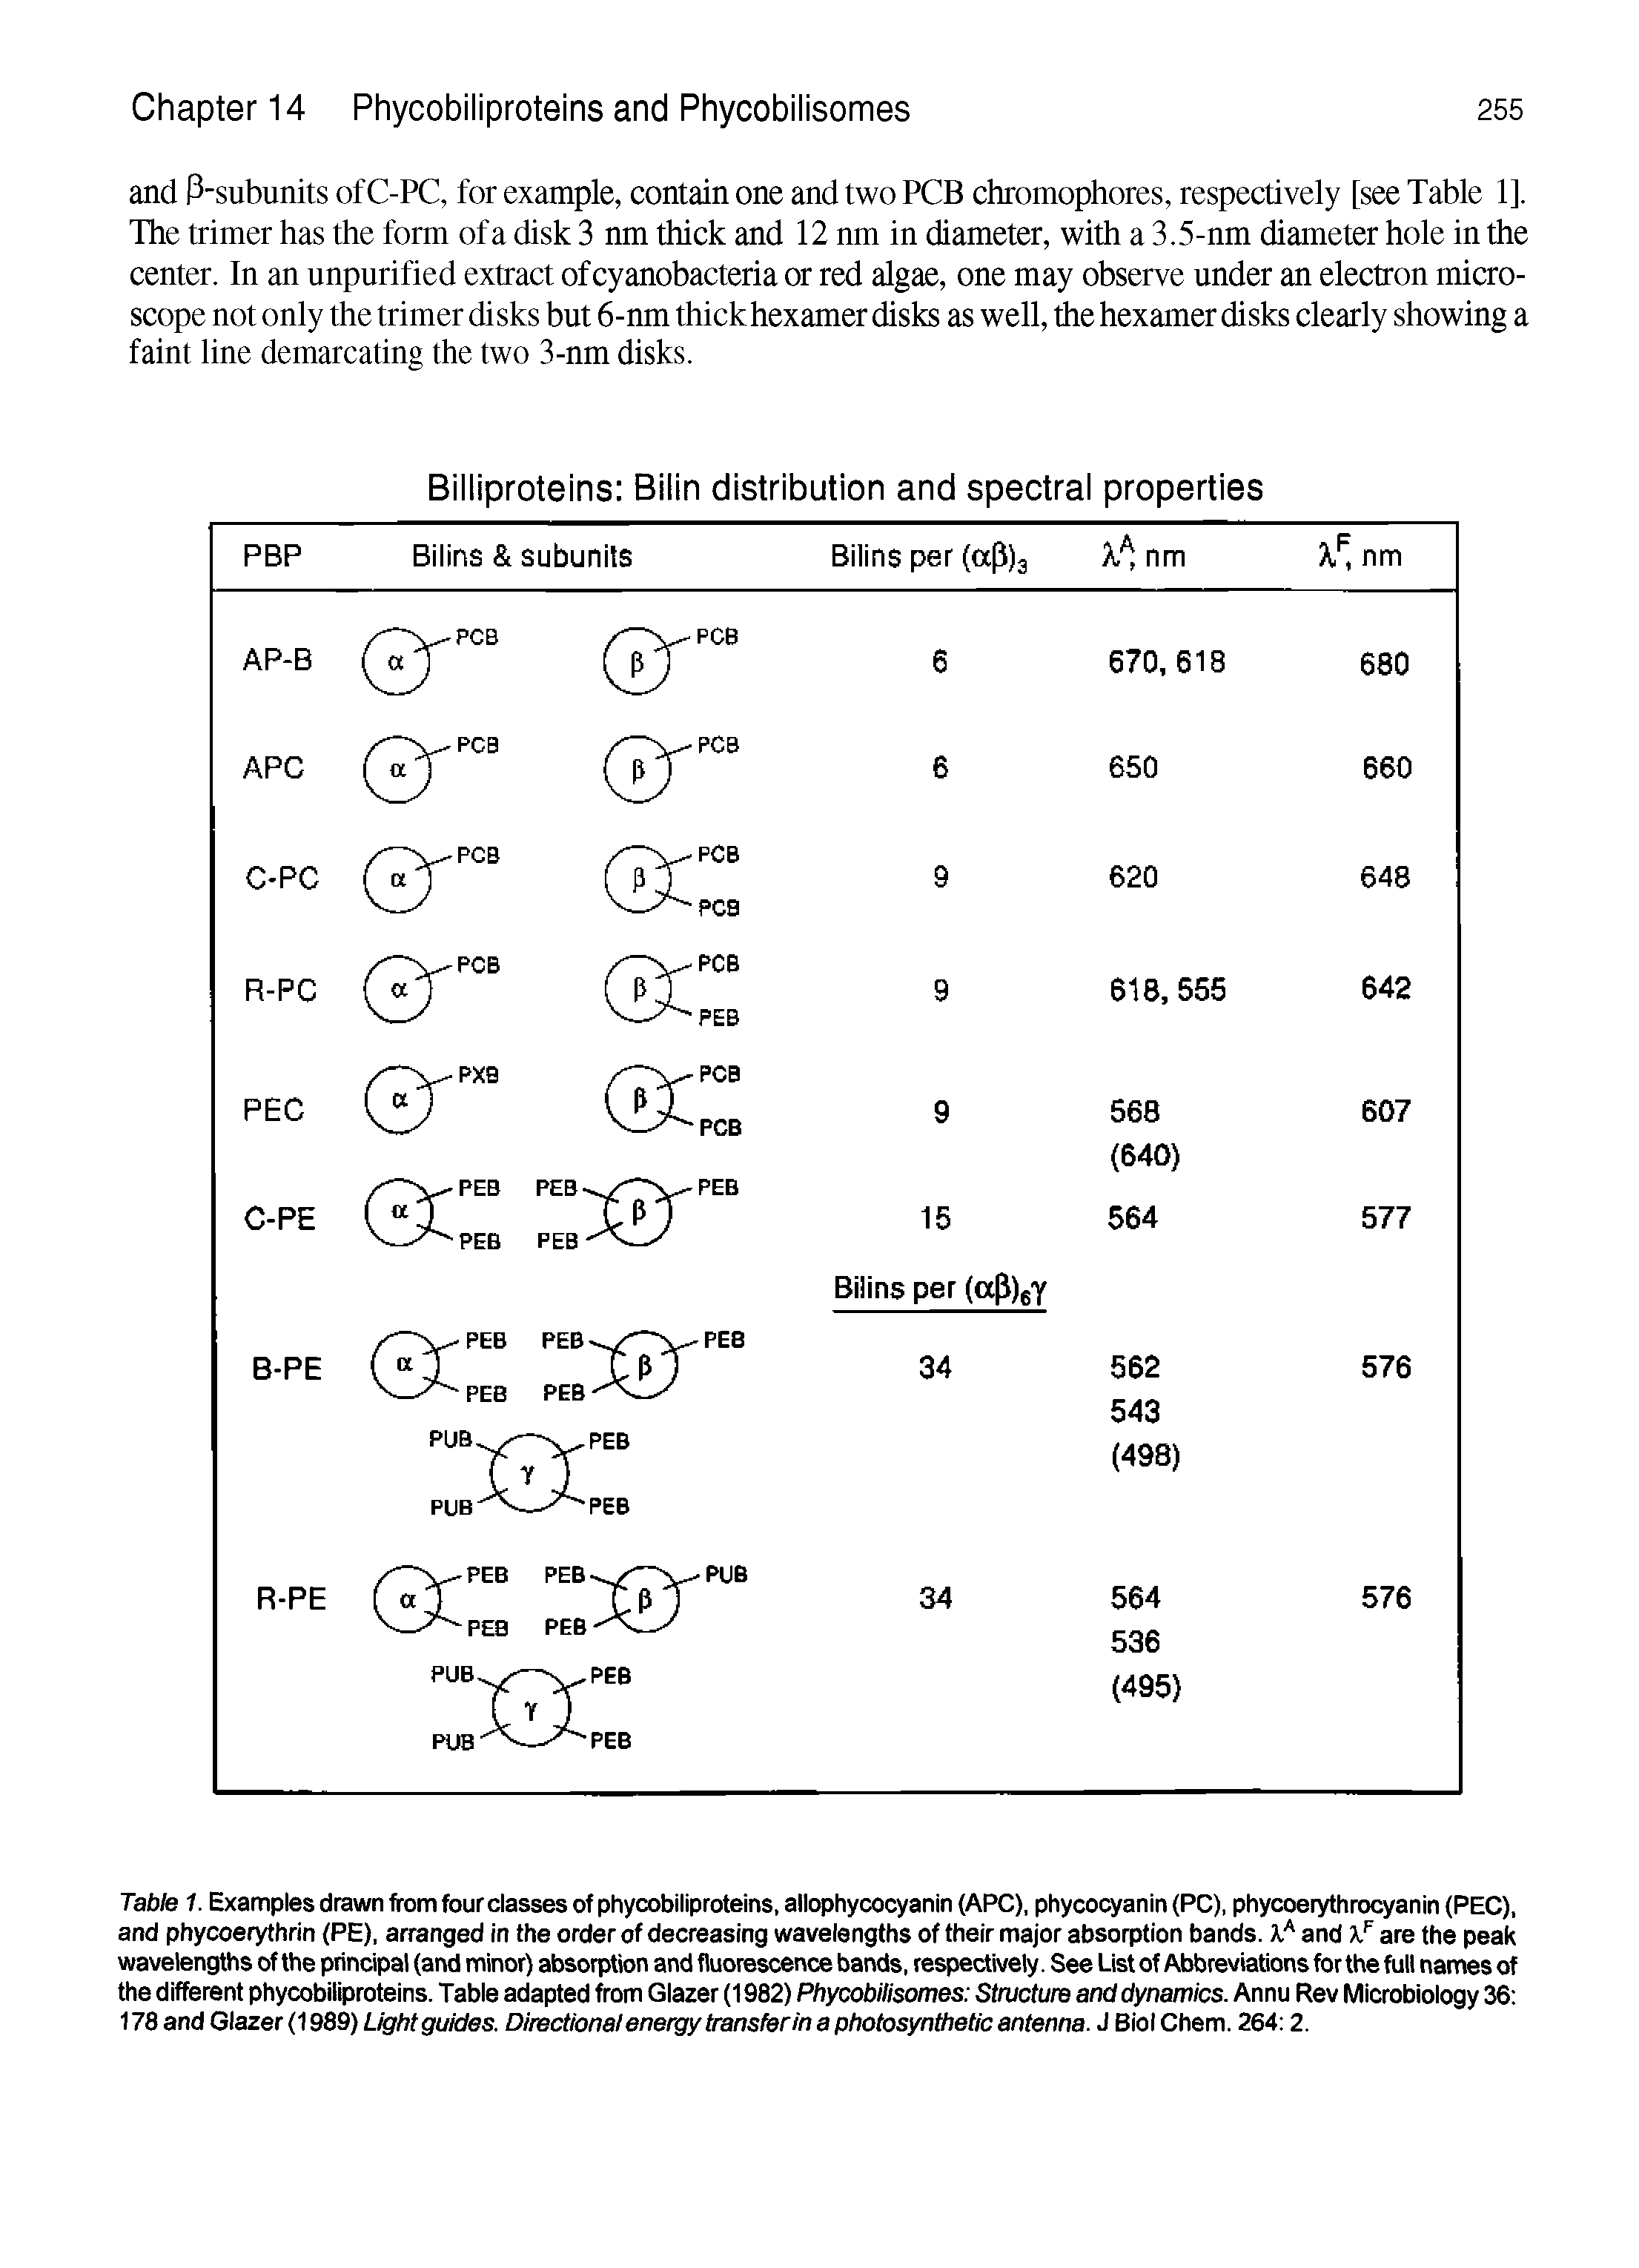 Table 1. Examples drawn from four classes of phycobiliproteins, allophycocyanin (APC), phycocyanin (PC), phycoerythrocyanin (PEC), and phycoerythrin (PE), arranged in the order of decreasing wavelengths of their major absorption bands. and x " are the peak wavelengths of the principal (and minor) absorption and fluorescence bands, respectively. See List of Abbreviations for the full names of the different phycobiliproteins. Table adapted from Glazer (1982) Phycobilisomes Structure and dynamics. Annu Rev Microbiology 36 178 and Glazer (1989) Light guides. Directionai energy transfer in a photosynthetic antenna. J Biol Chem. 264 2.